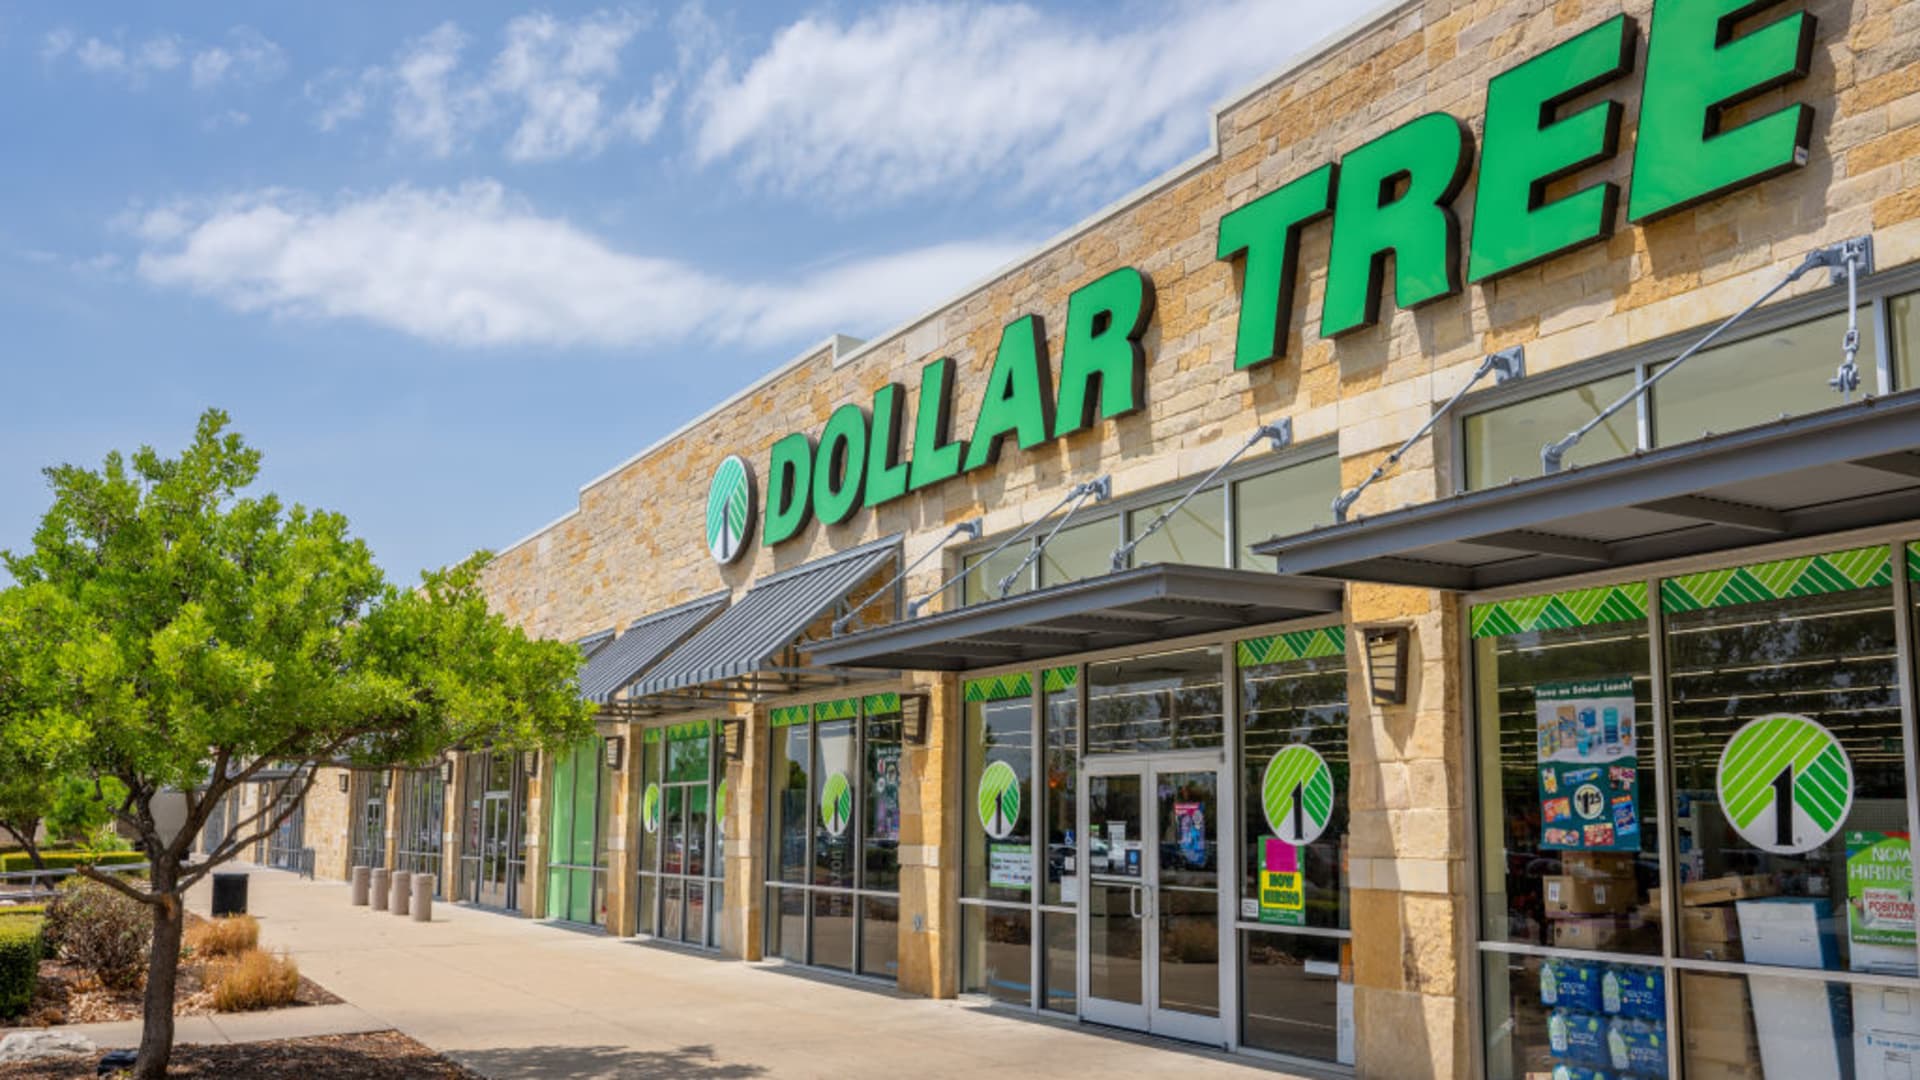 Stocks making the biggest moves midday: Dollar Tree, iRobot, Bloom Energy and more